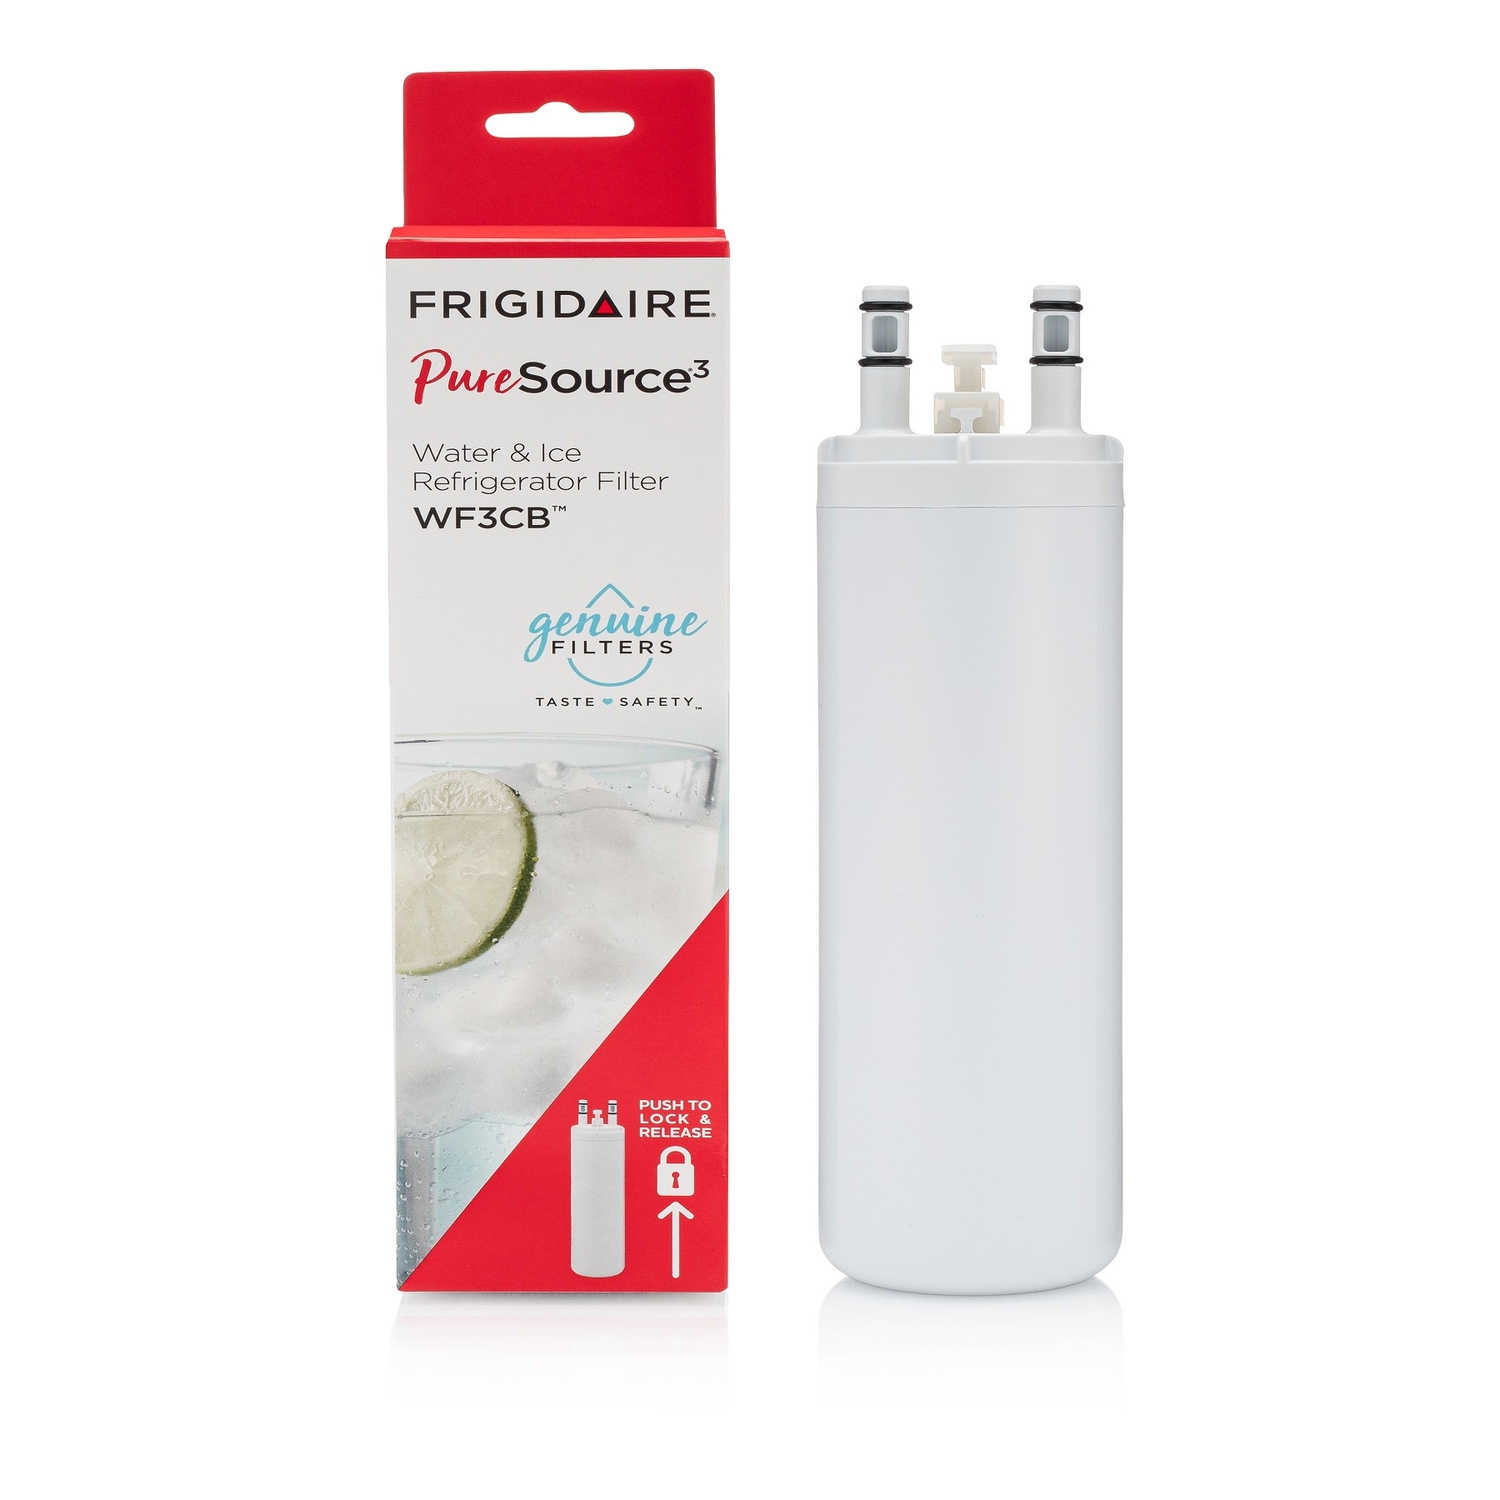 Photos - Other sanitary accessories Frigidaire PureSource 3 Replacement Water Filter WF3CB 